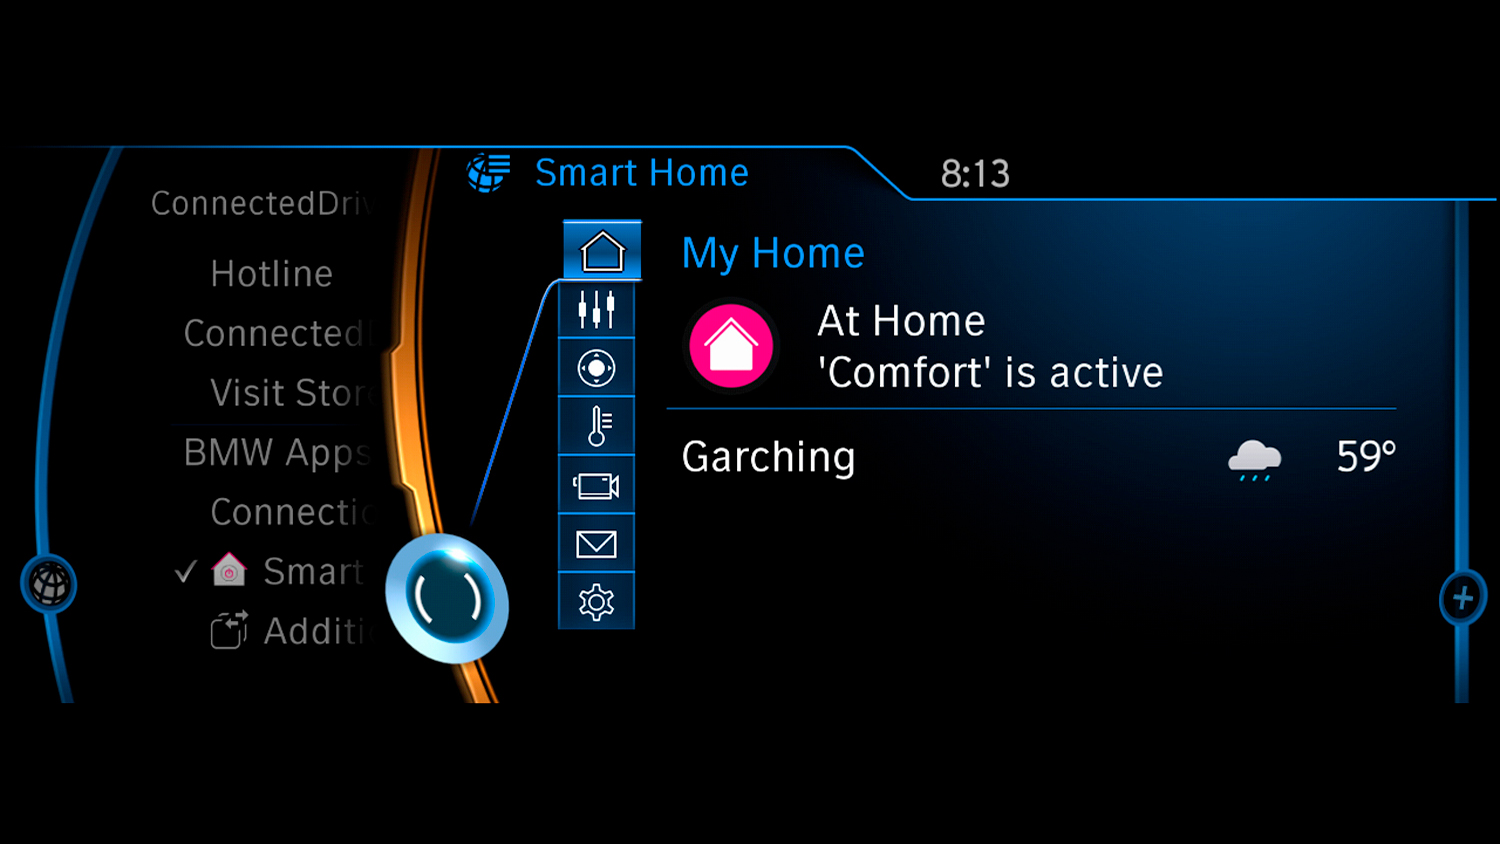 bmw announces samsung collaboration new connectivity features at ifa connecteddrive 2015